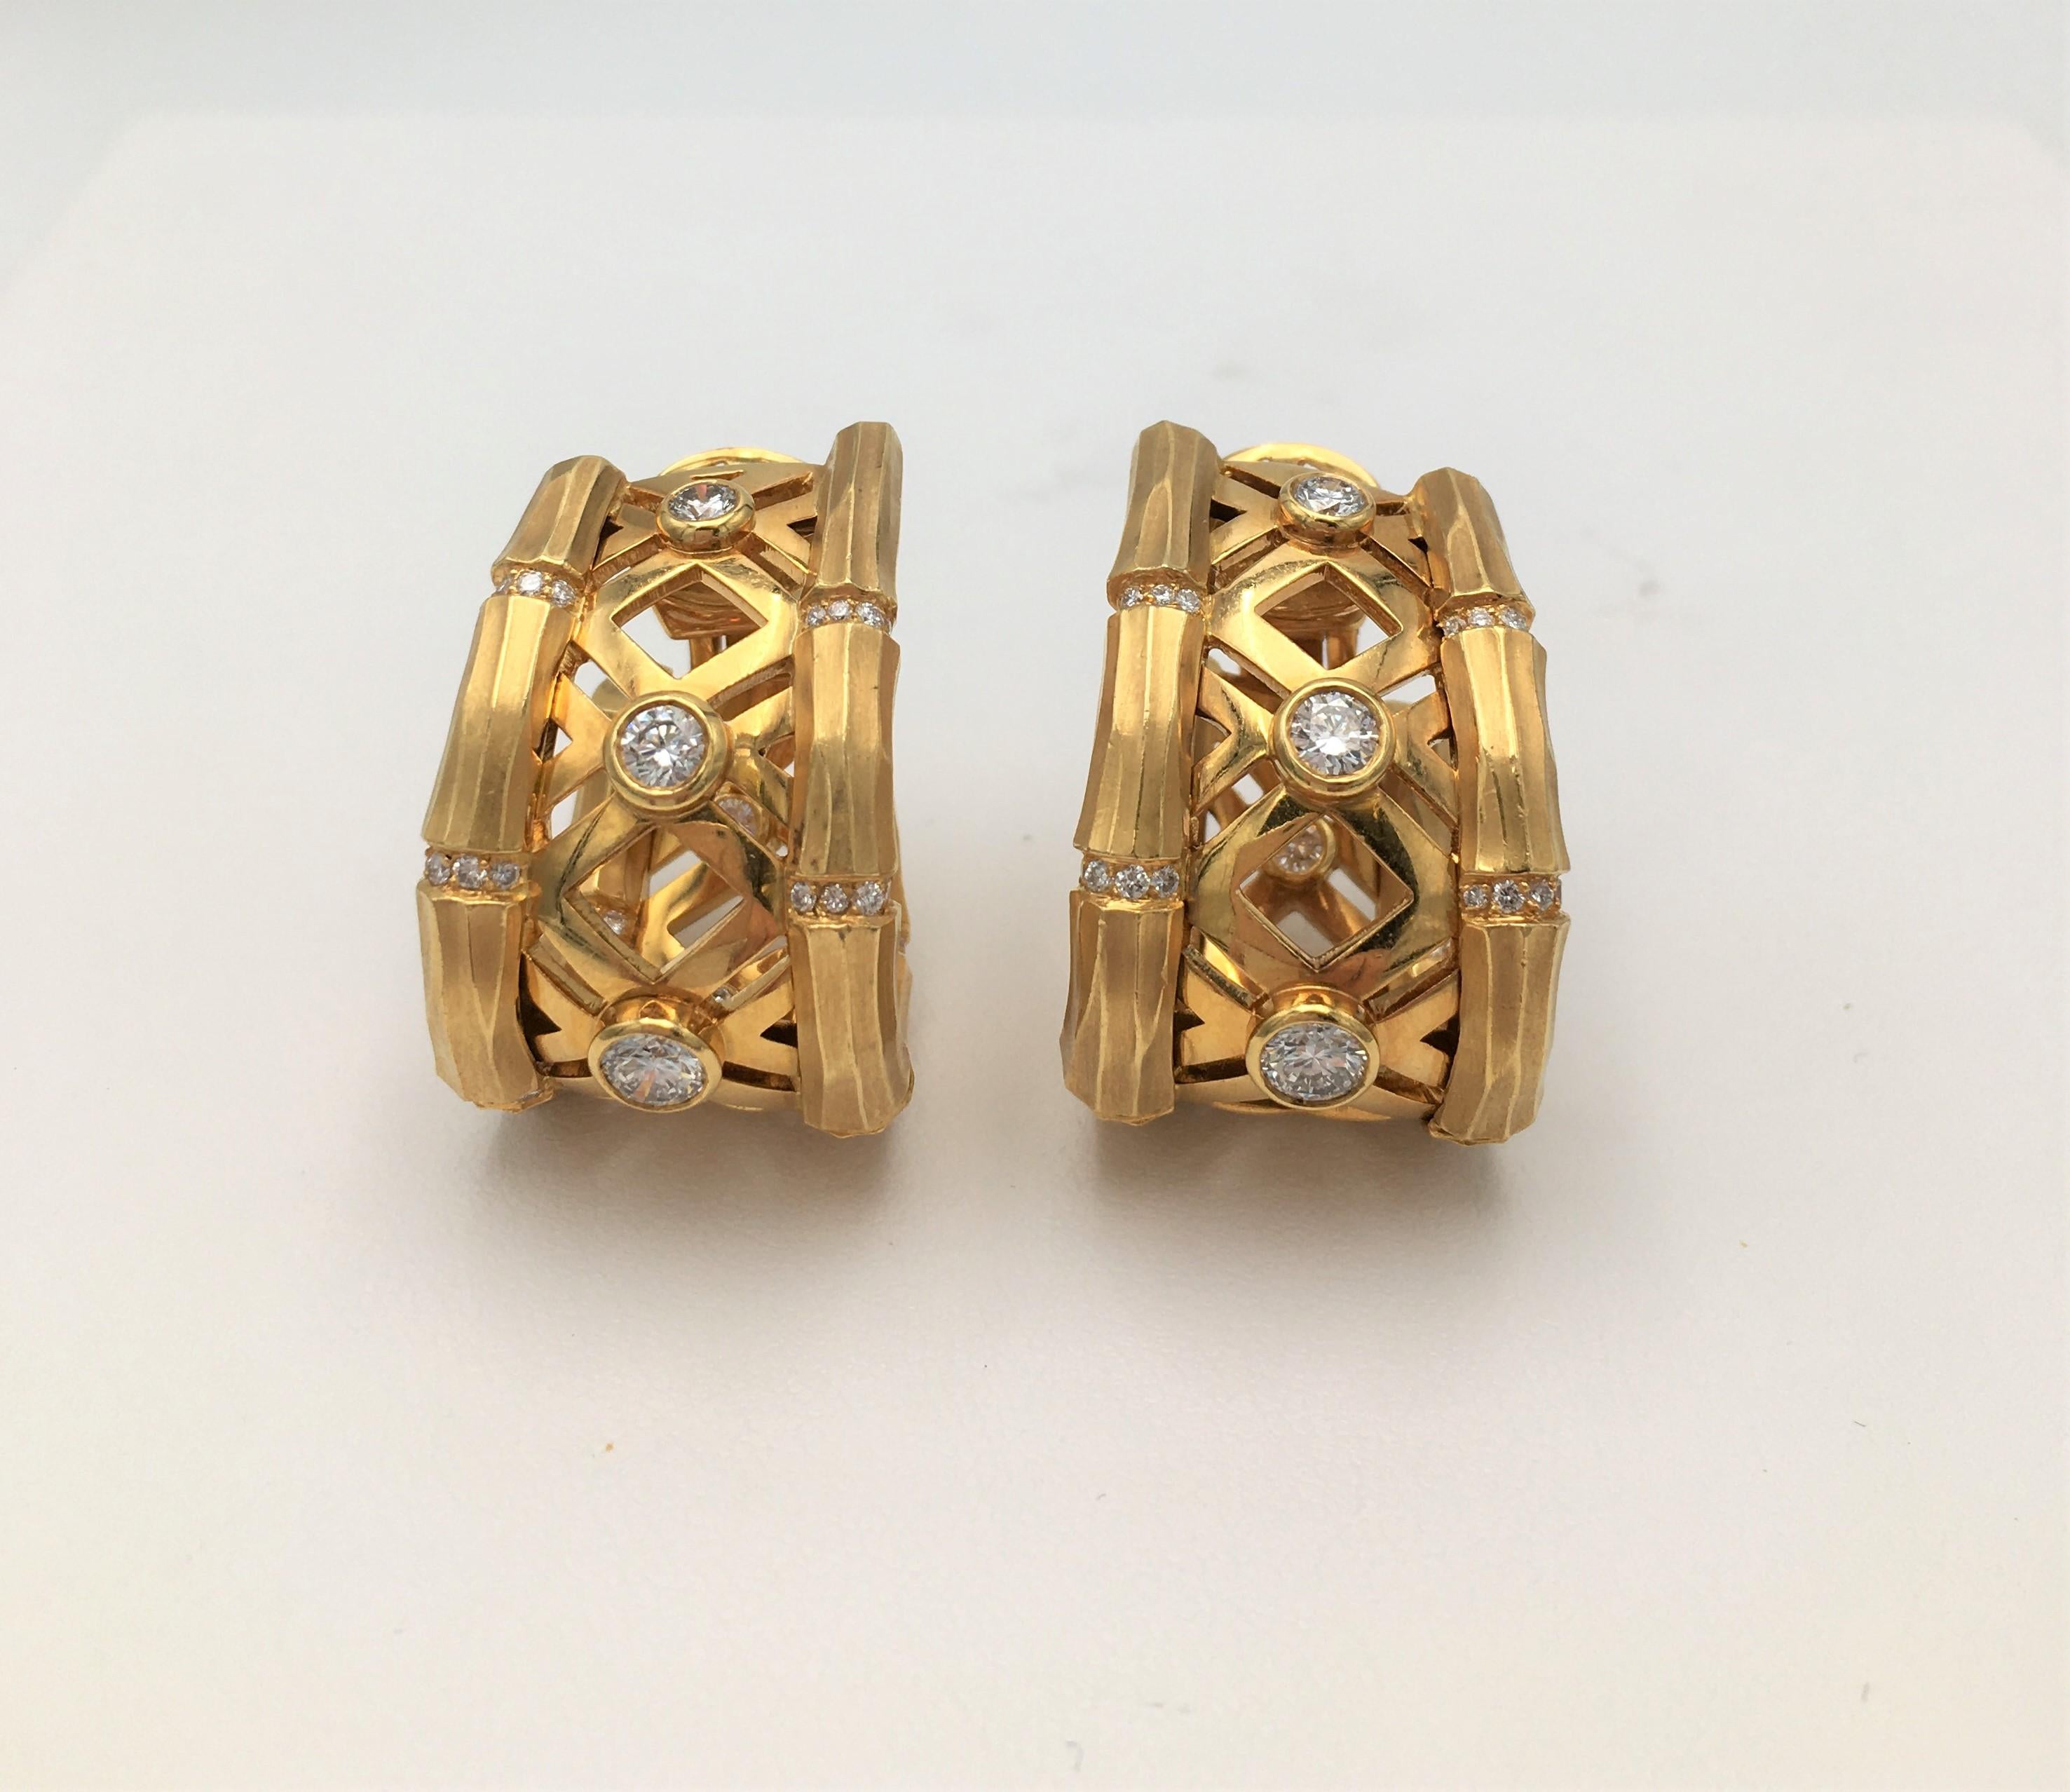 Authentic Cartier 'Bamboo' hoop earrings feature bezel set high-quality round brilliant diamonds weighing an estimated 1.45 carats total. Crafted in 18 karat yellow brushed gold the bamboo links are connected by rows of smaller round brilliant cut